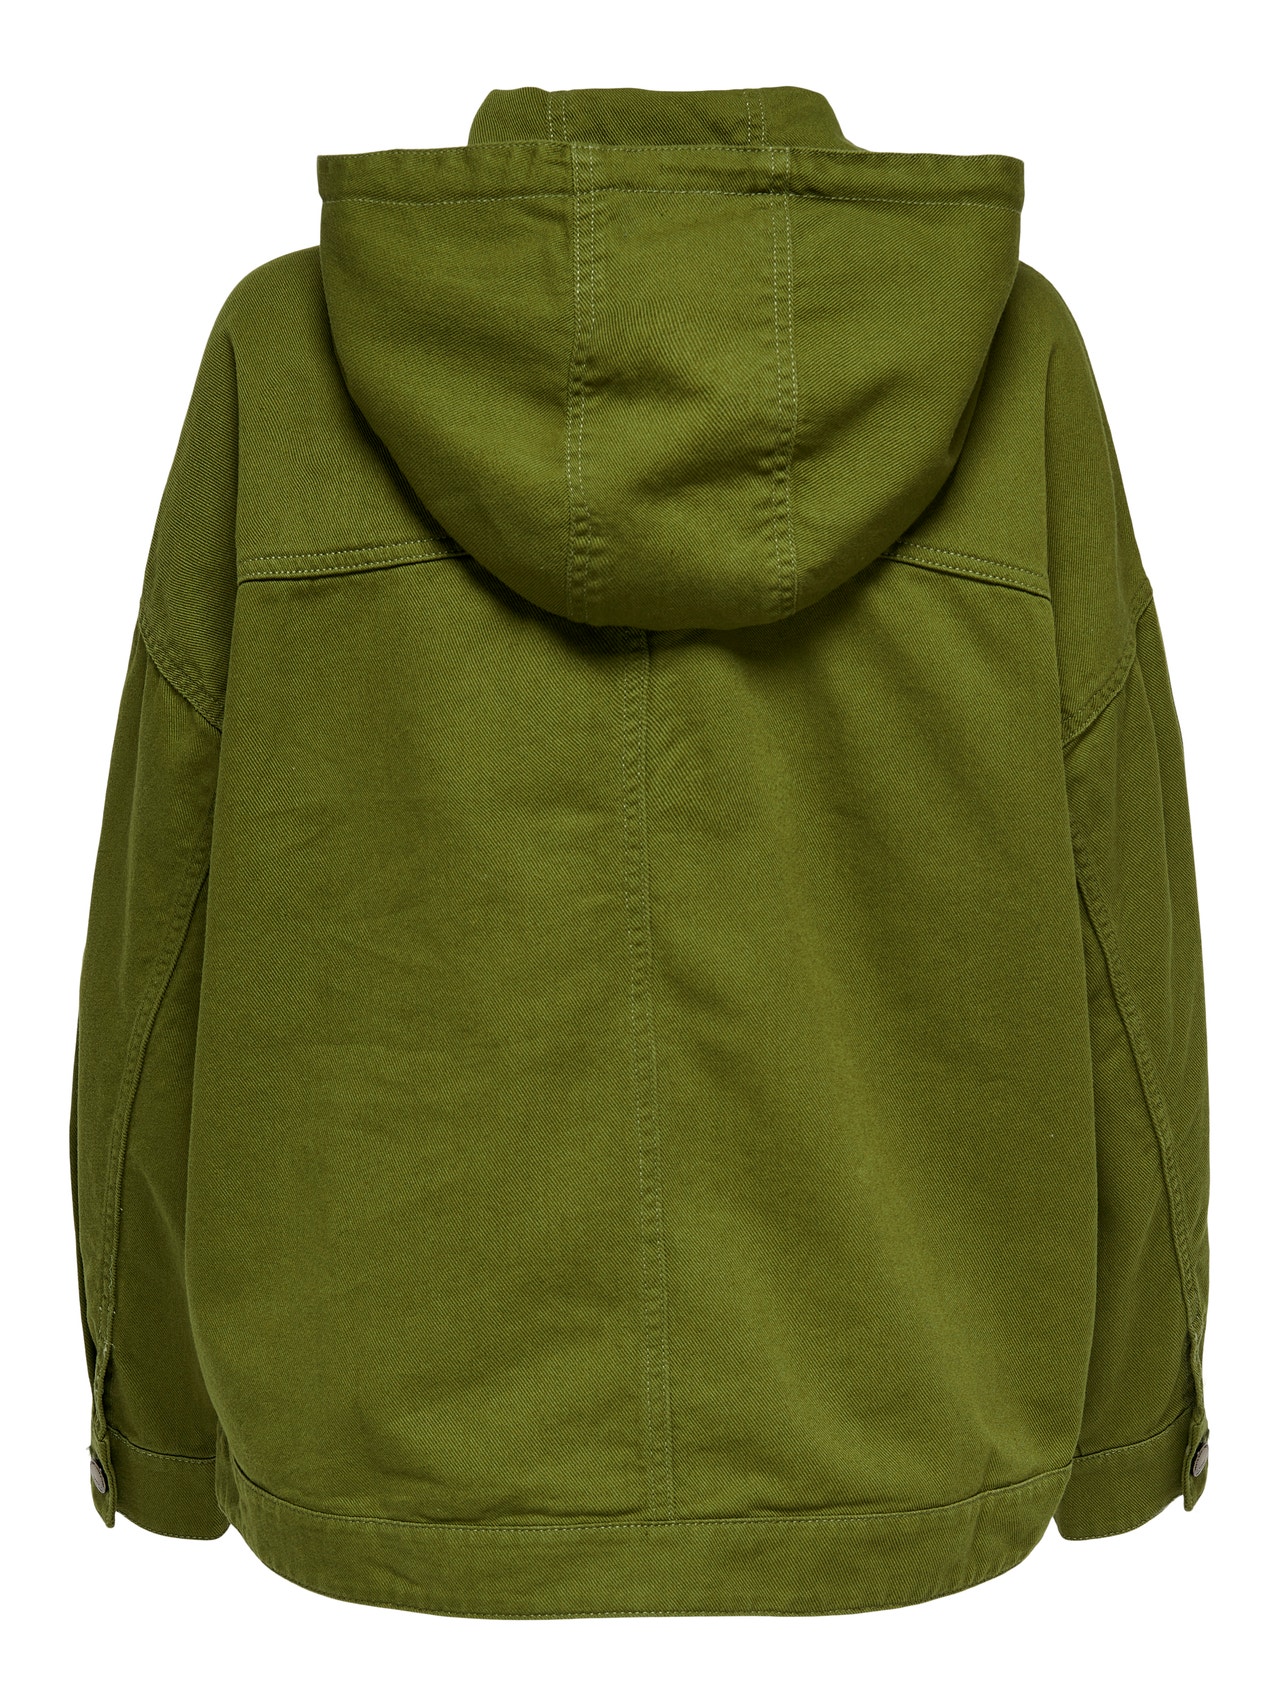 ONLY Loose fitted jacket -Avocado - 15274997